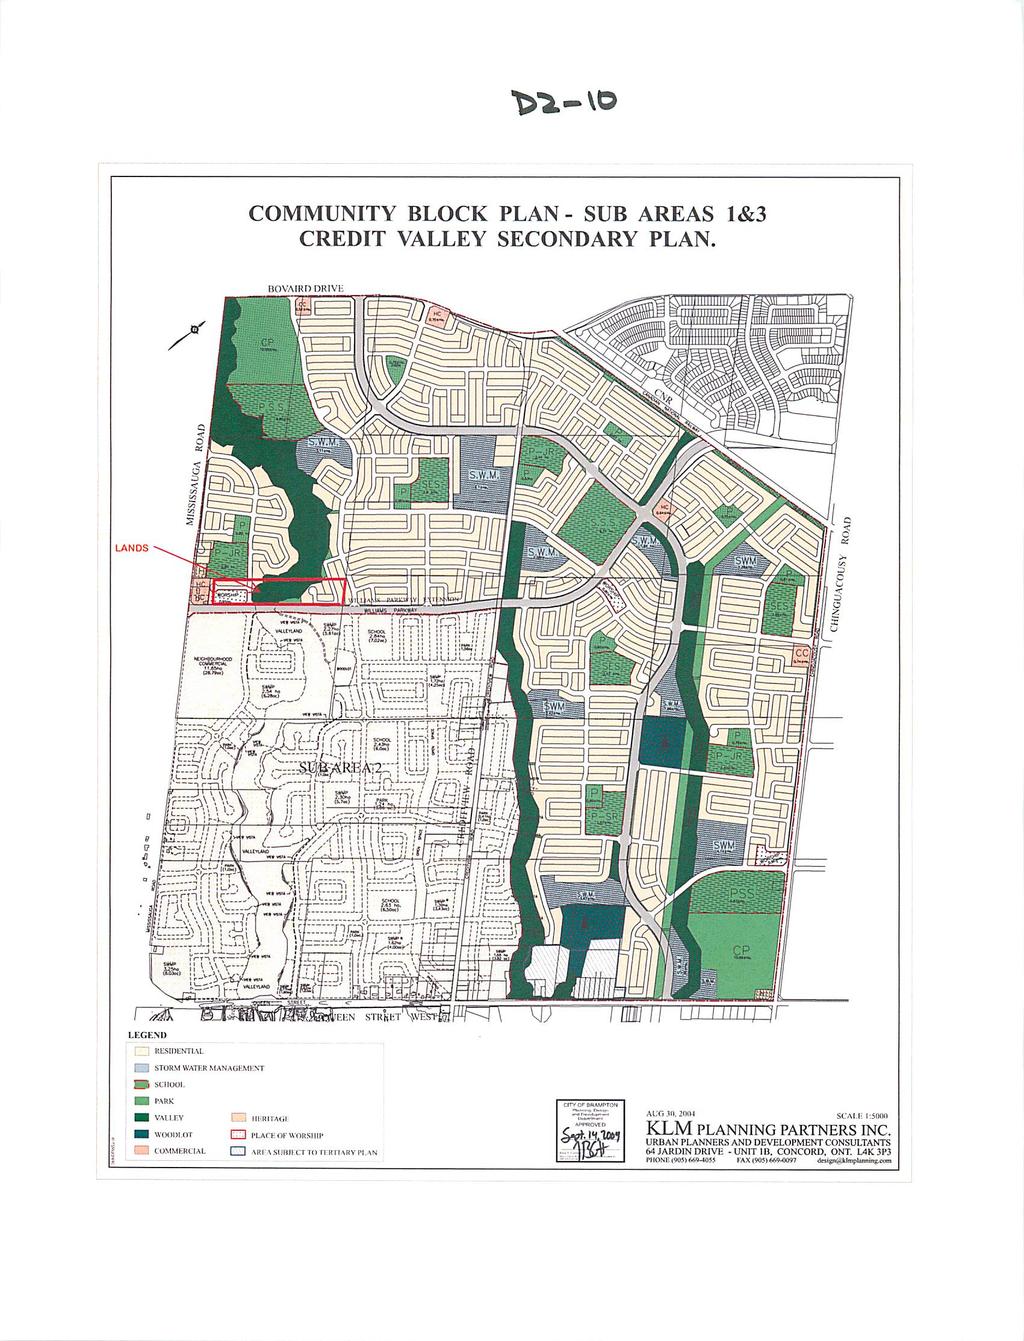 \>i-vo COMMUNITY BLOCK PLAN- SUB AREAS 1&3 CREDIT VALLEY SECONDARY PLAN. BOVAIRD DRIVE LEG KM) RESIDENTIAL I"".'.', STORM WATER MANAGEMENT SCHOOL l'-\hk VALLEY.